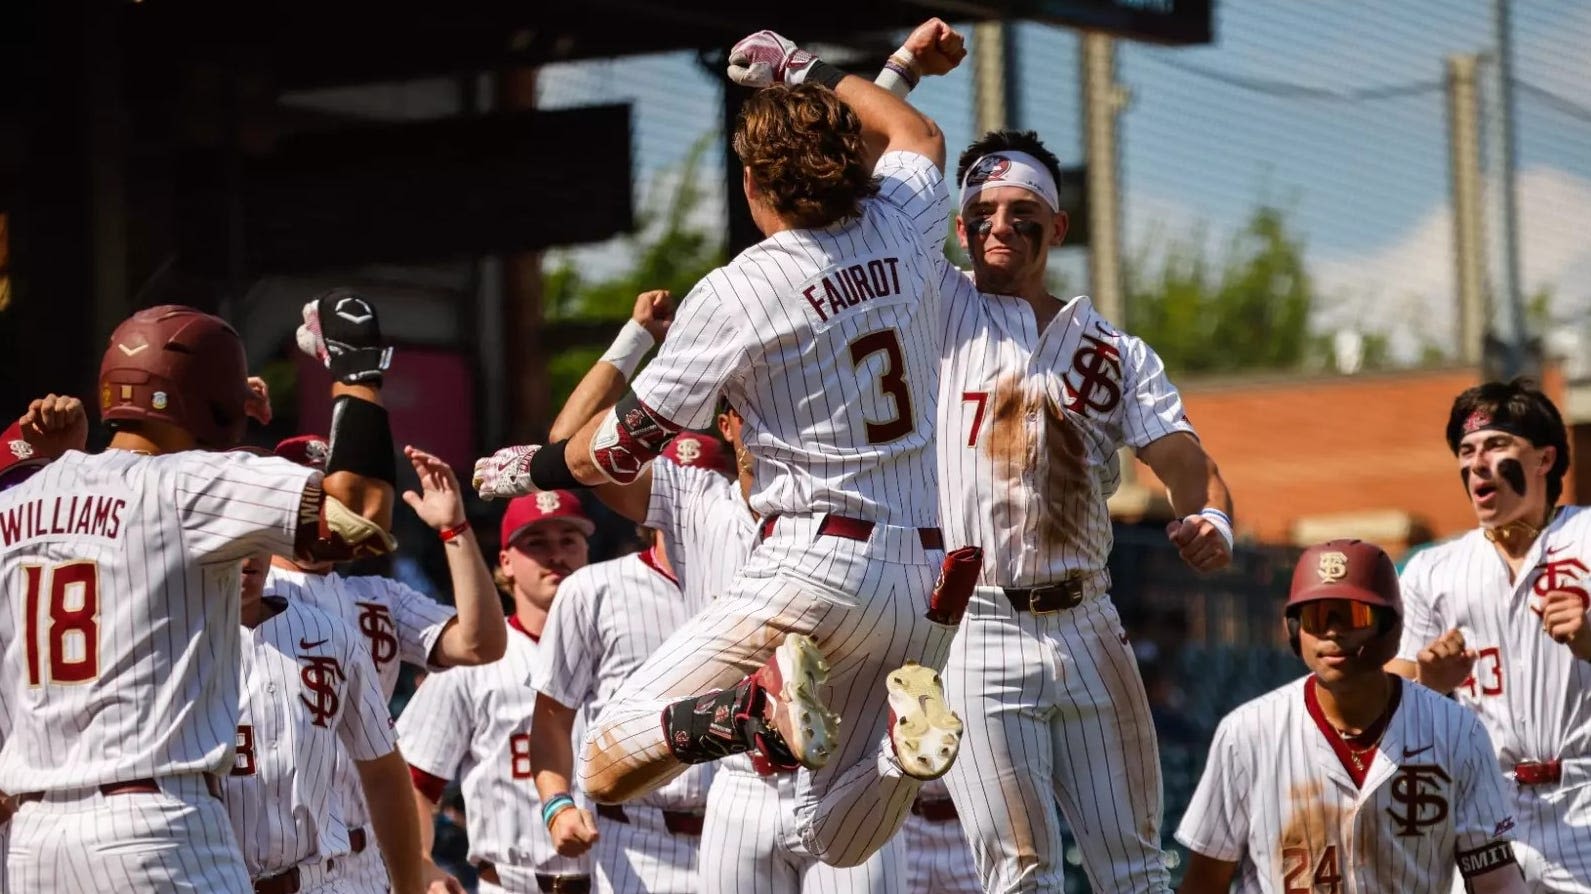 FSU baseball: Complete schedule for NCAA Tallahassee Regional with UCF, Stetson, Alabama